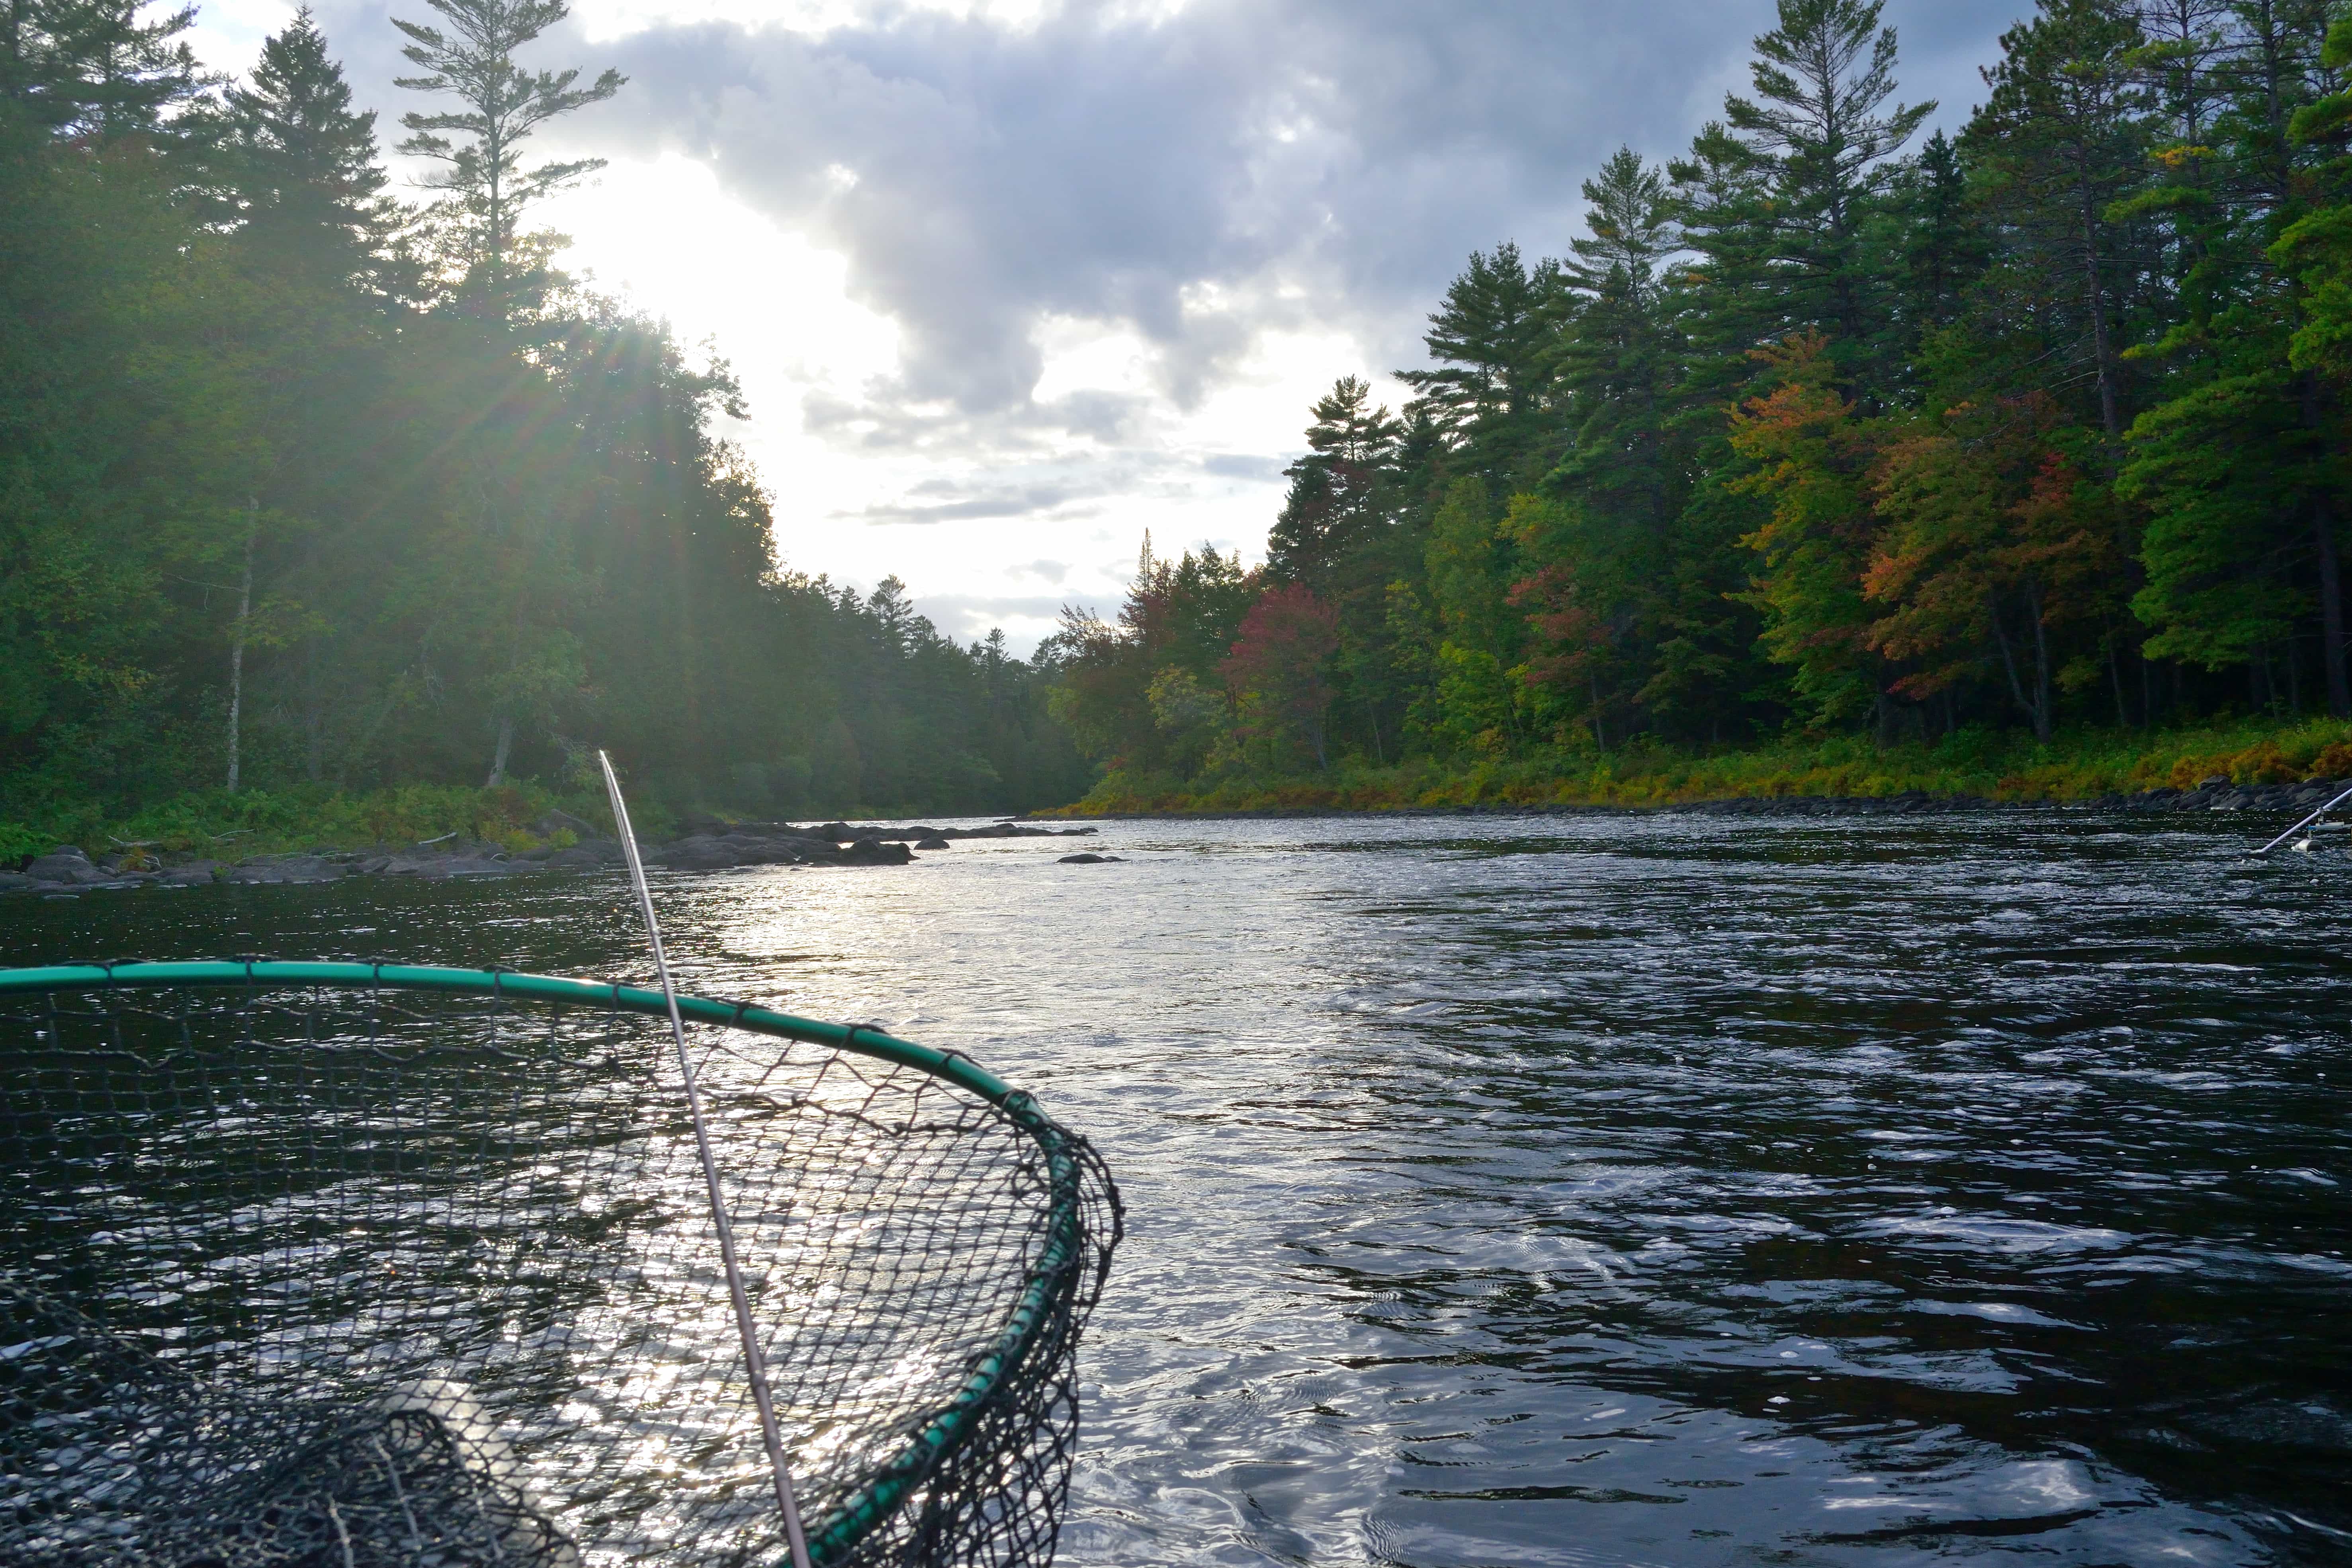 Another downstream shot - take note of the placement of the net and additional rod